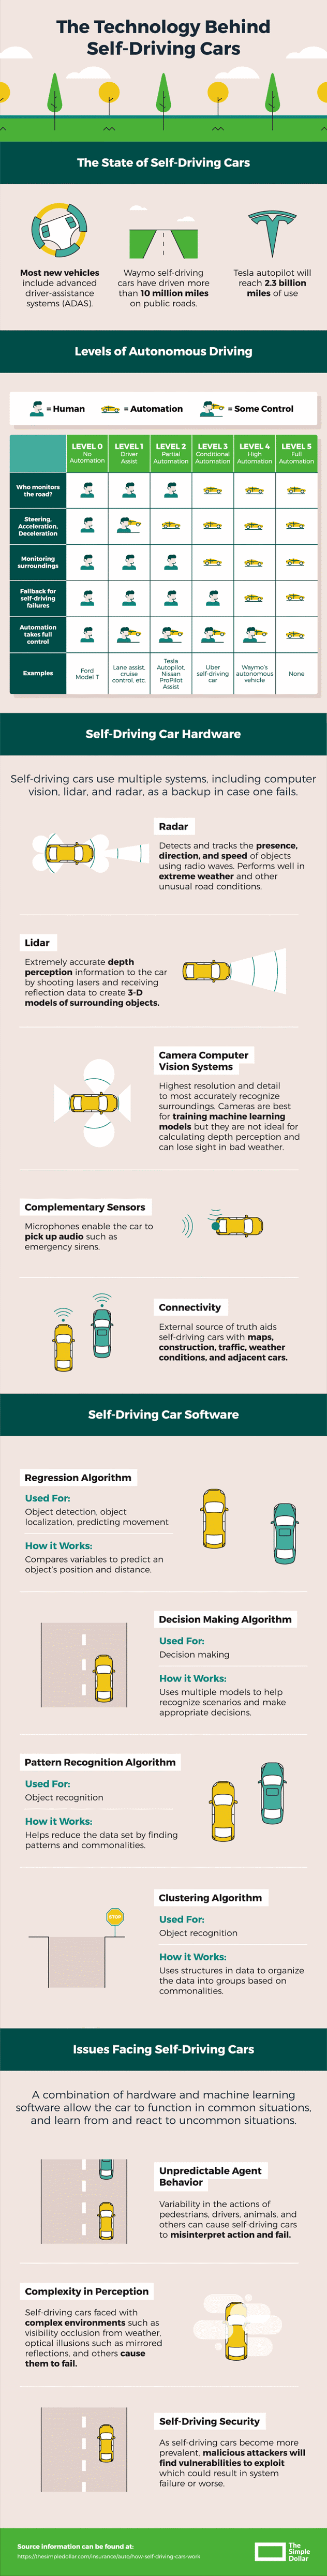 The Technology Behind self-driving cars #infographic